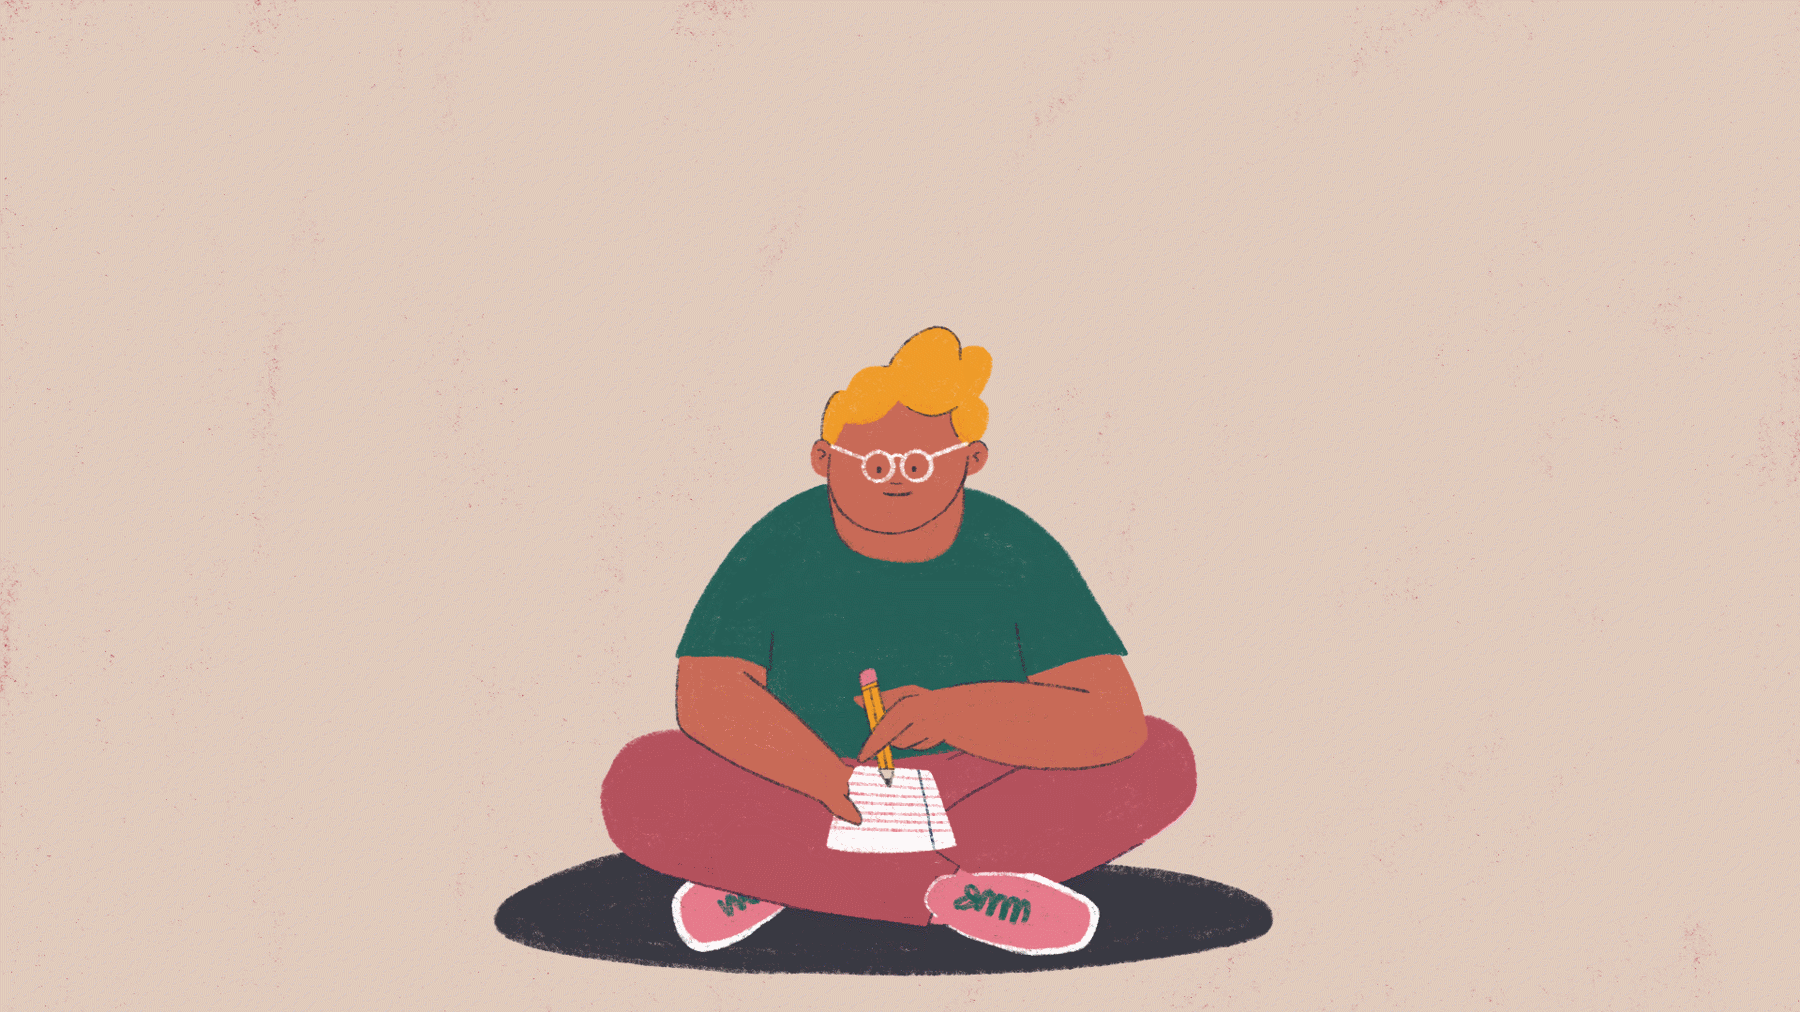 Cartoon young person sat on the floor, drawing a heart on a piece of paper with a pencil